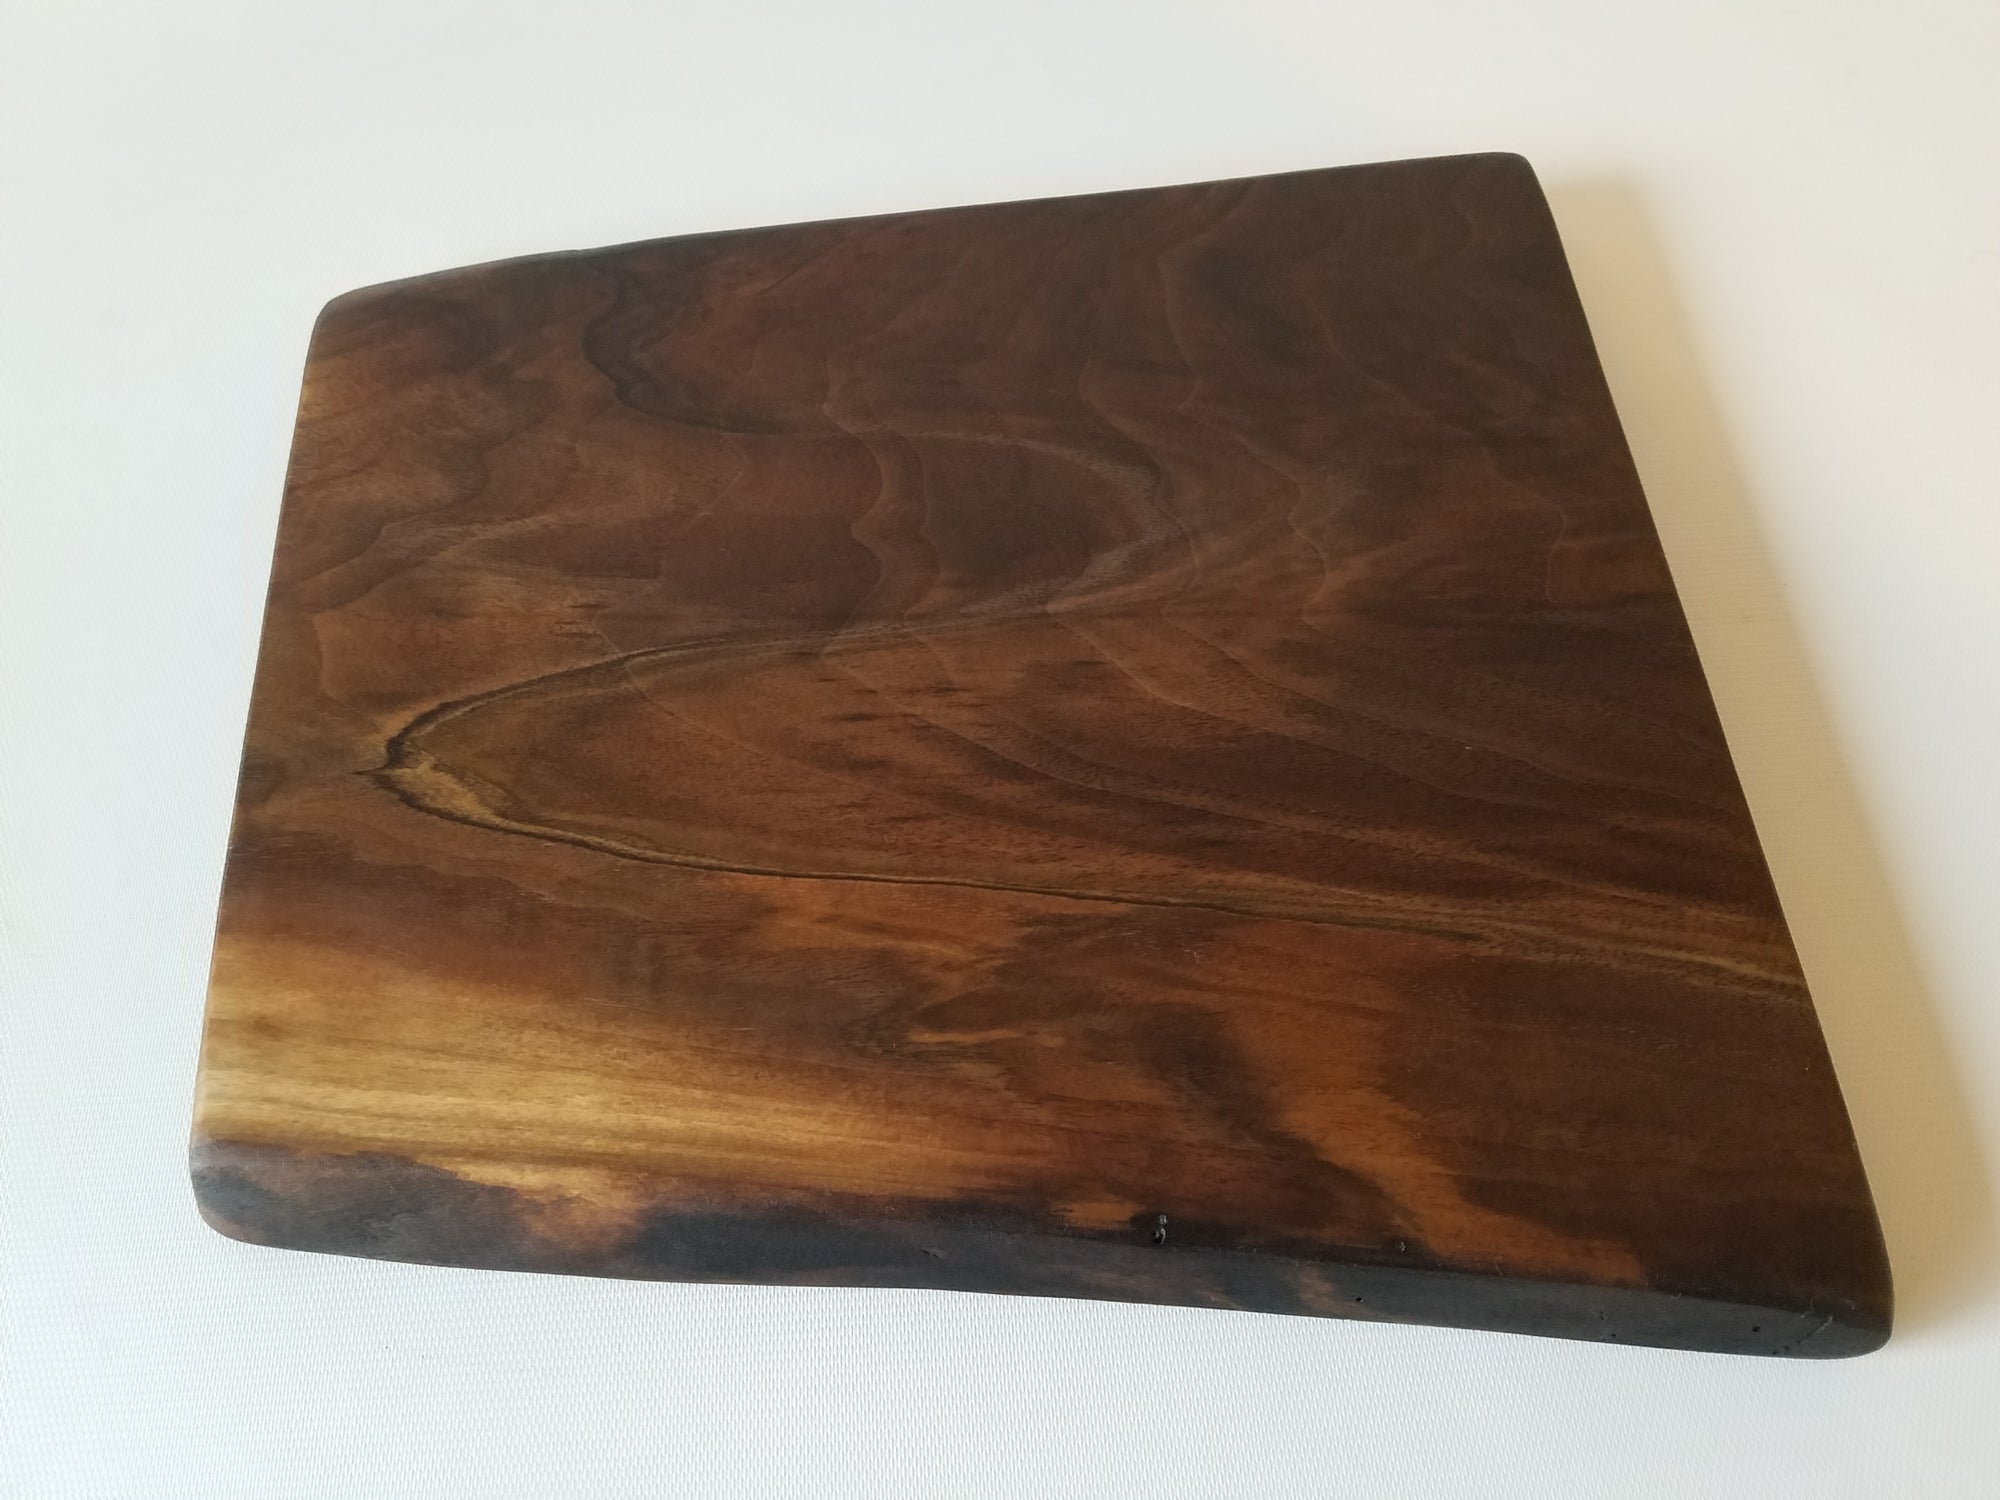 Walnut Charcuterie Board- Natural Wood- Serving Board- Food Server- Cutting Board- Party- Hostess- Table Decor- Gift- Foodie- Chef- Cooking